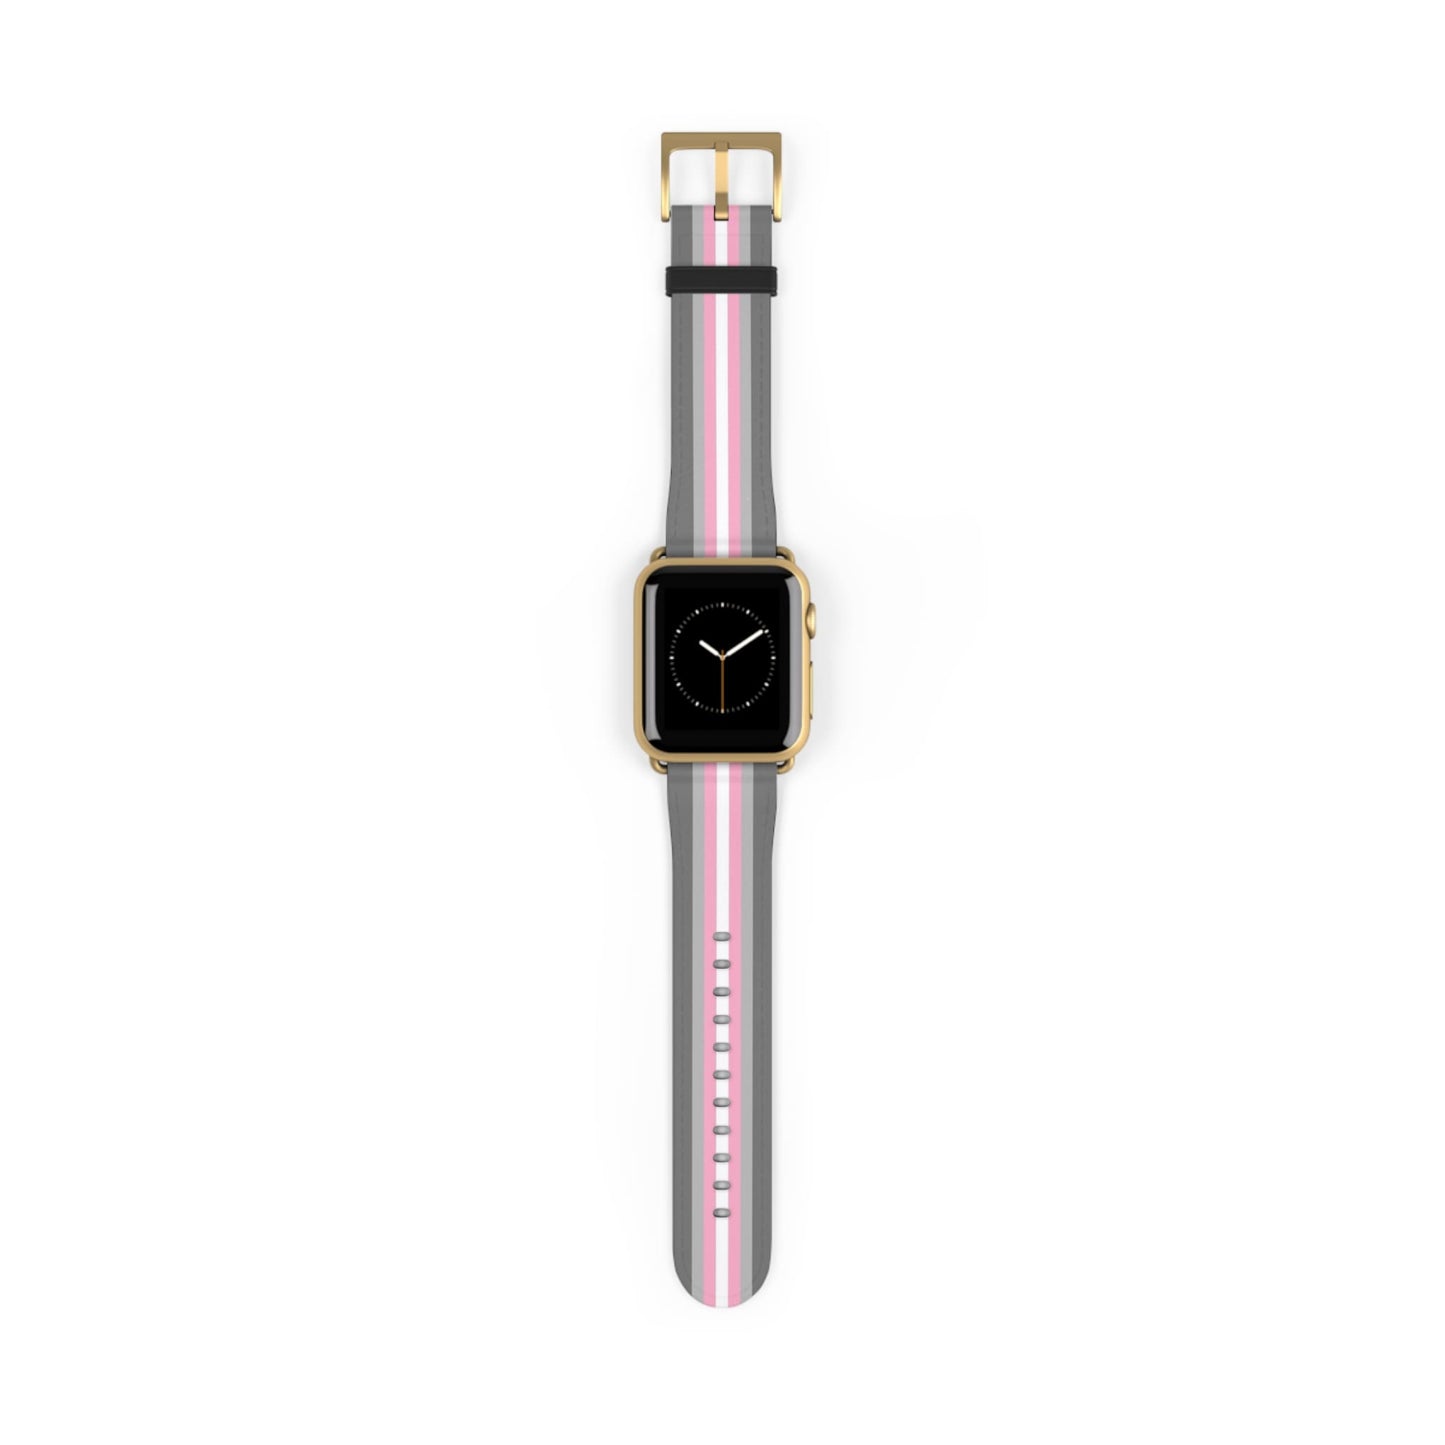 demigirl watch band for Apple iwatch, rose gold